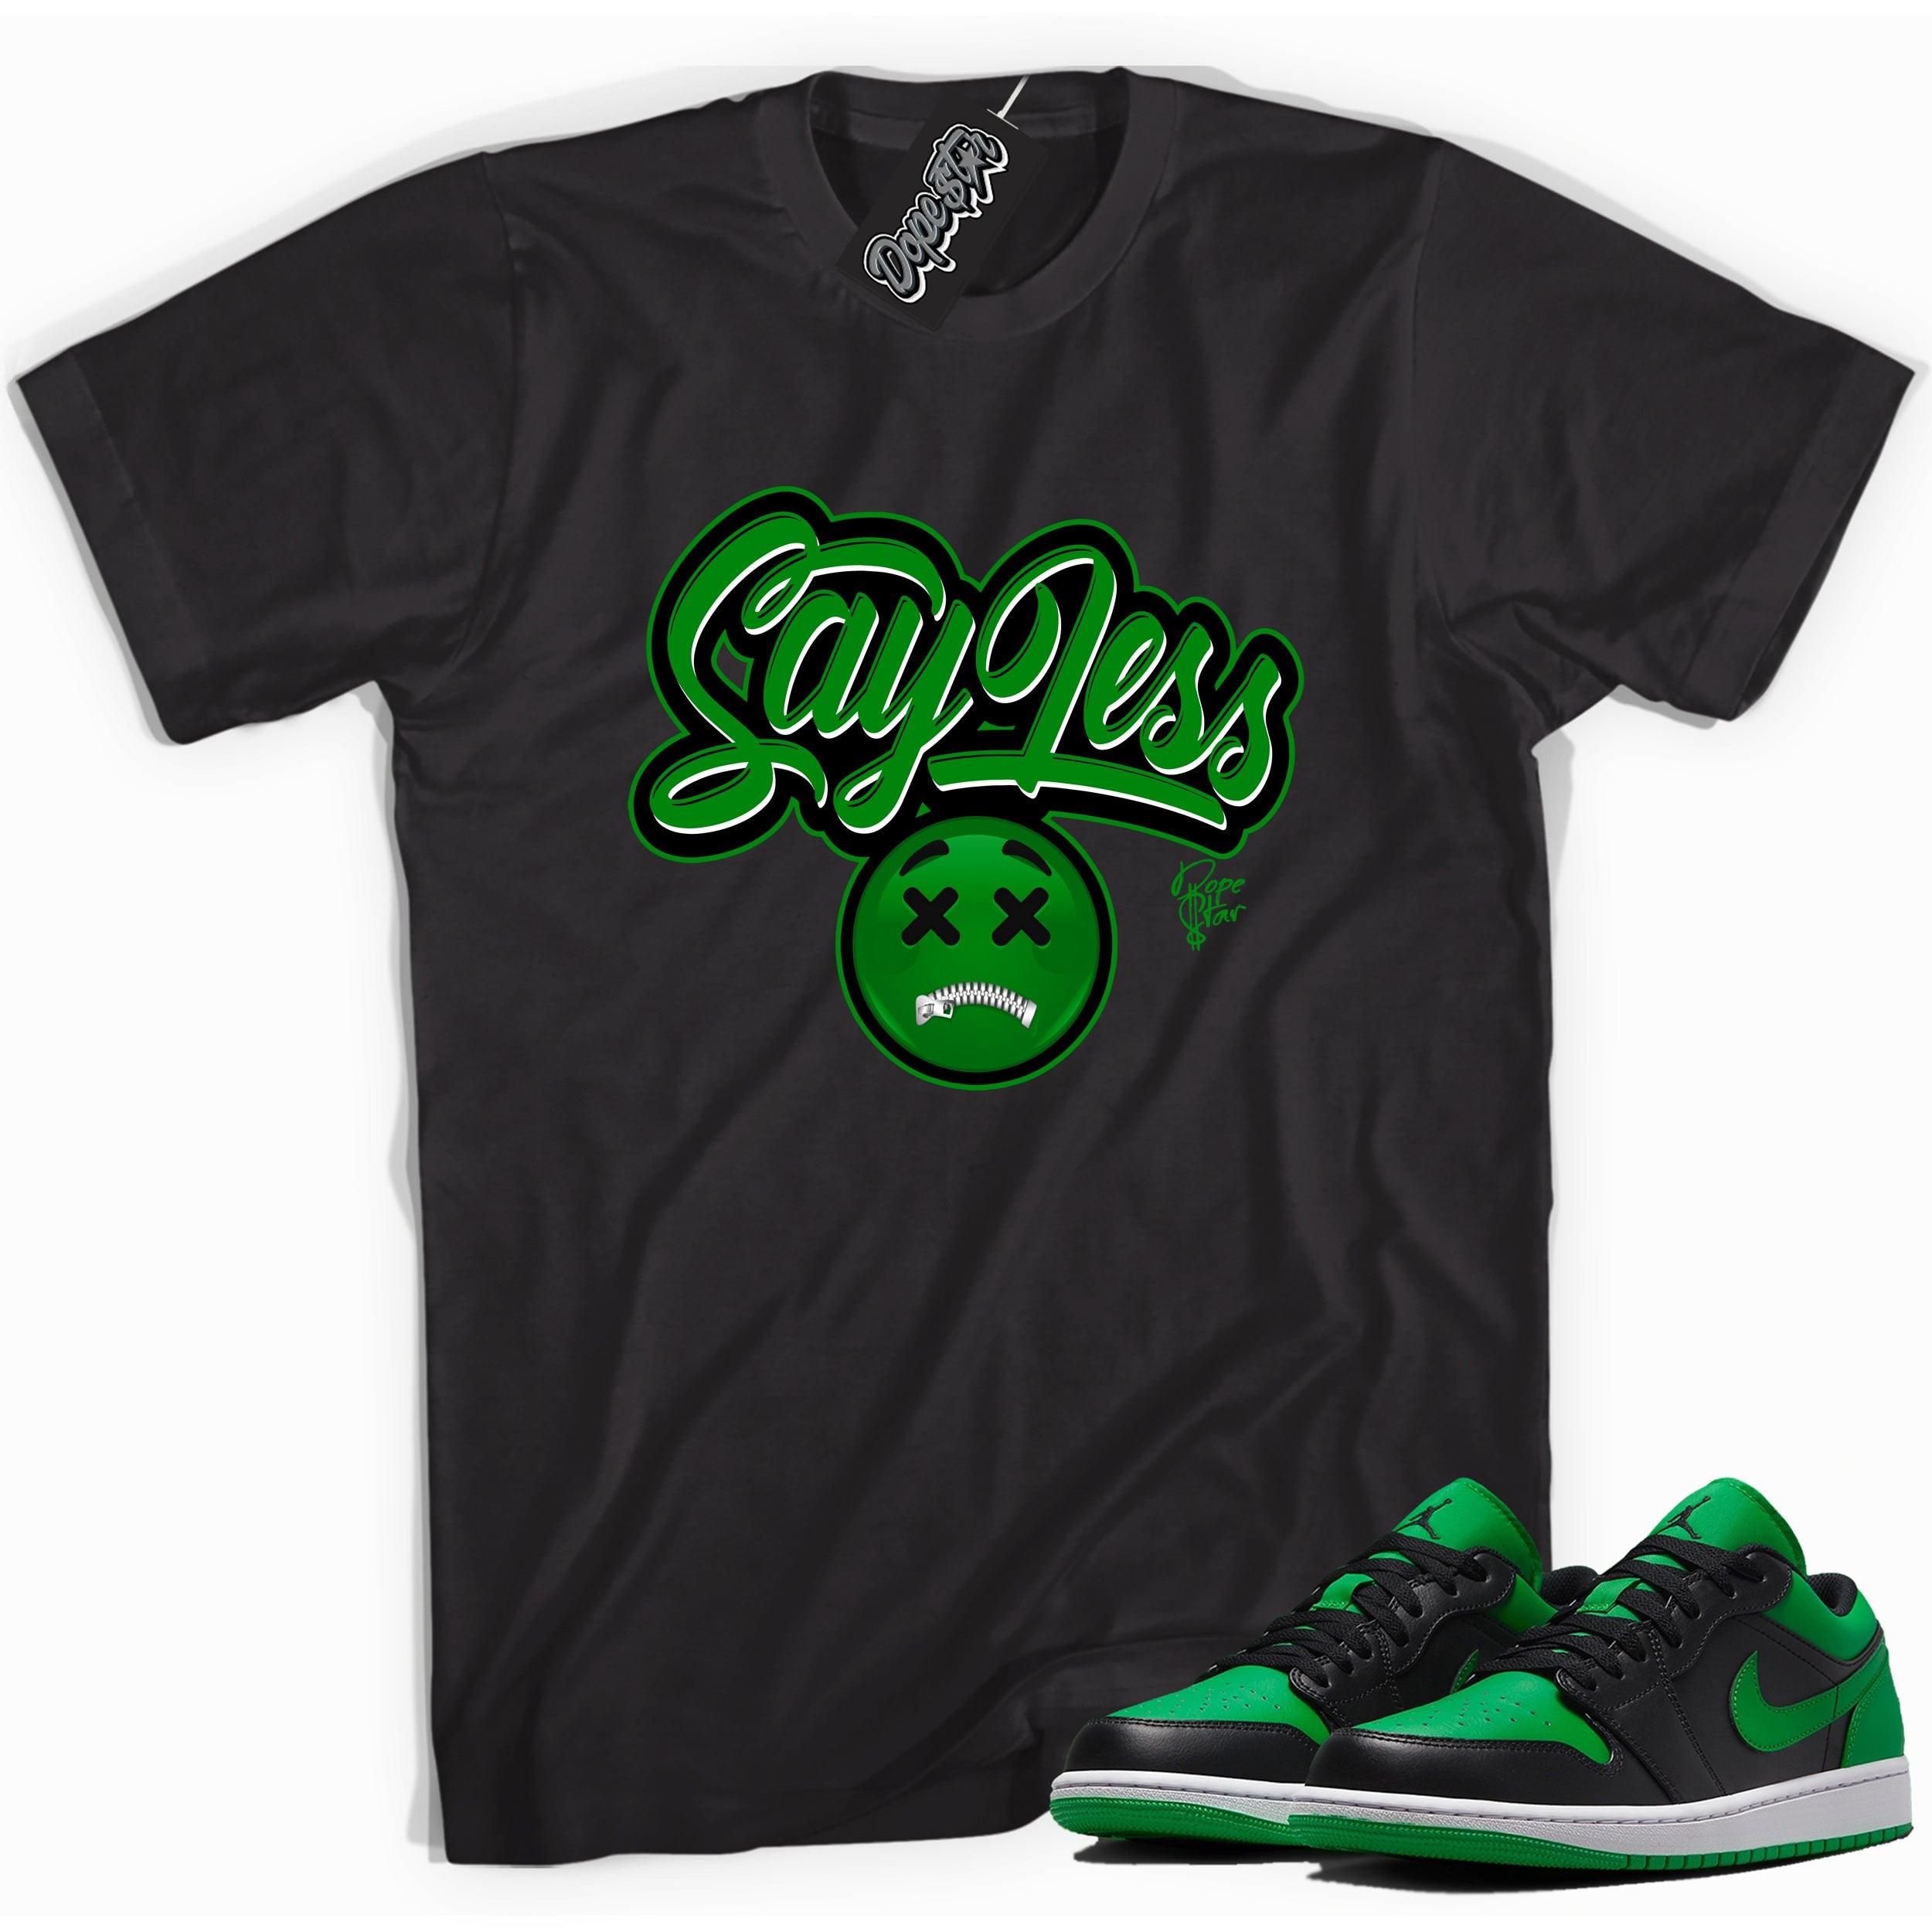 Cool black graphic tee with 'say less' print, that perfectly matches Air Jordan 1 Low Lucky Green sneakers